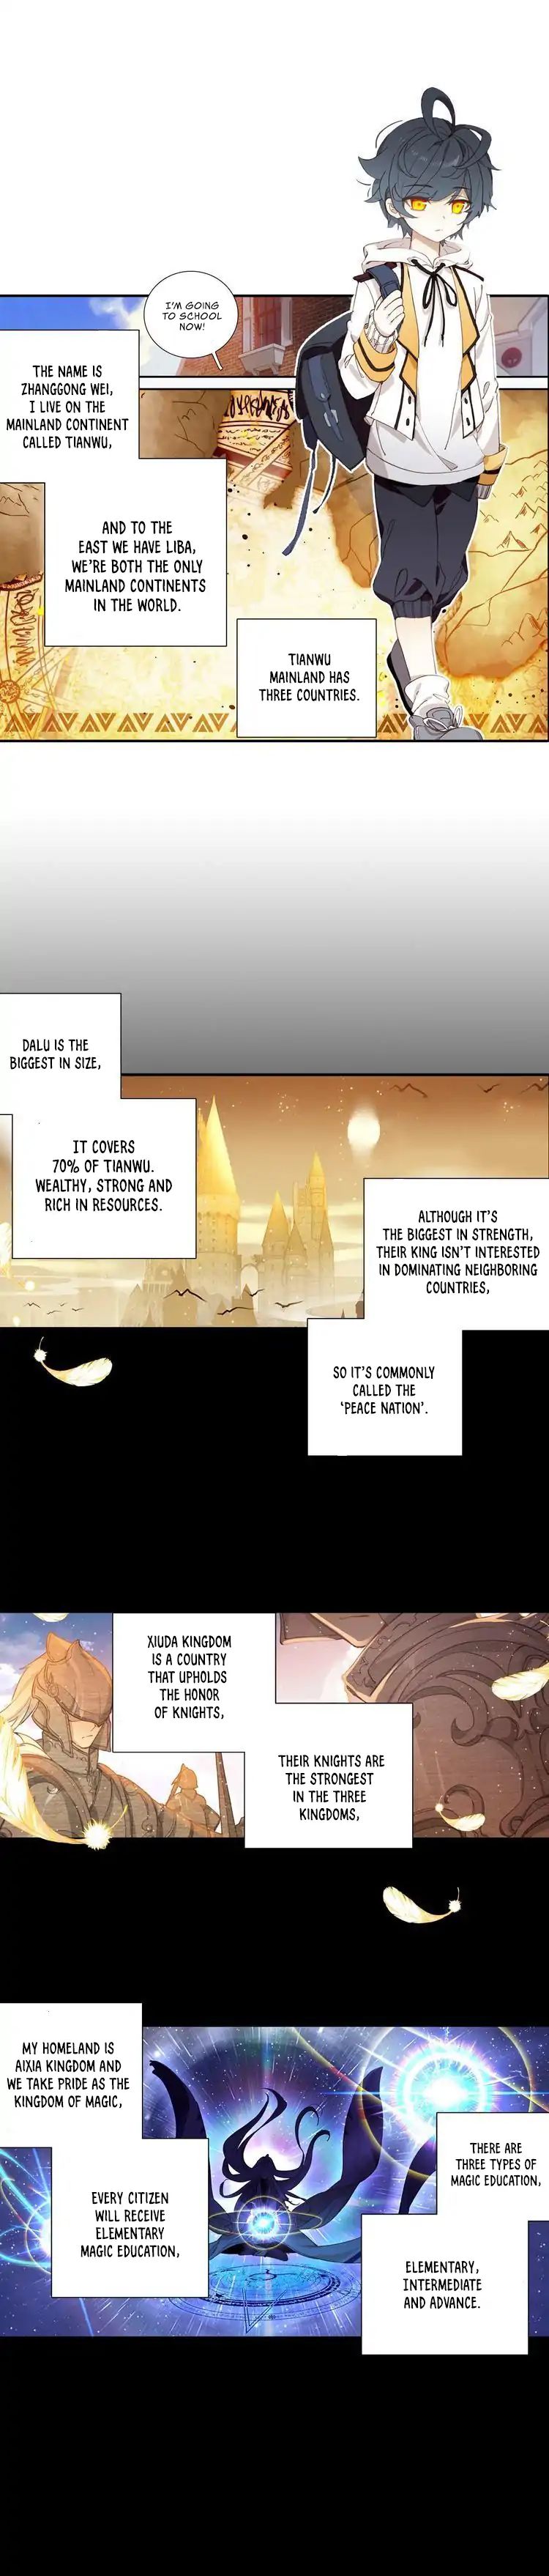 The Child Of Light - Page 2